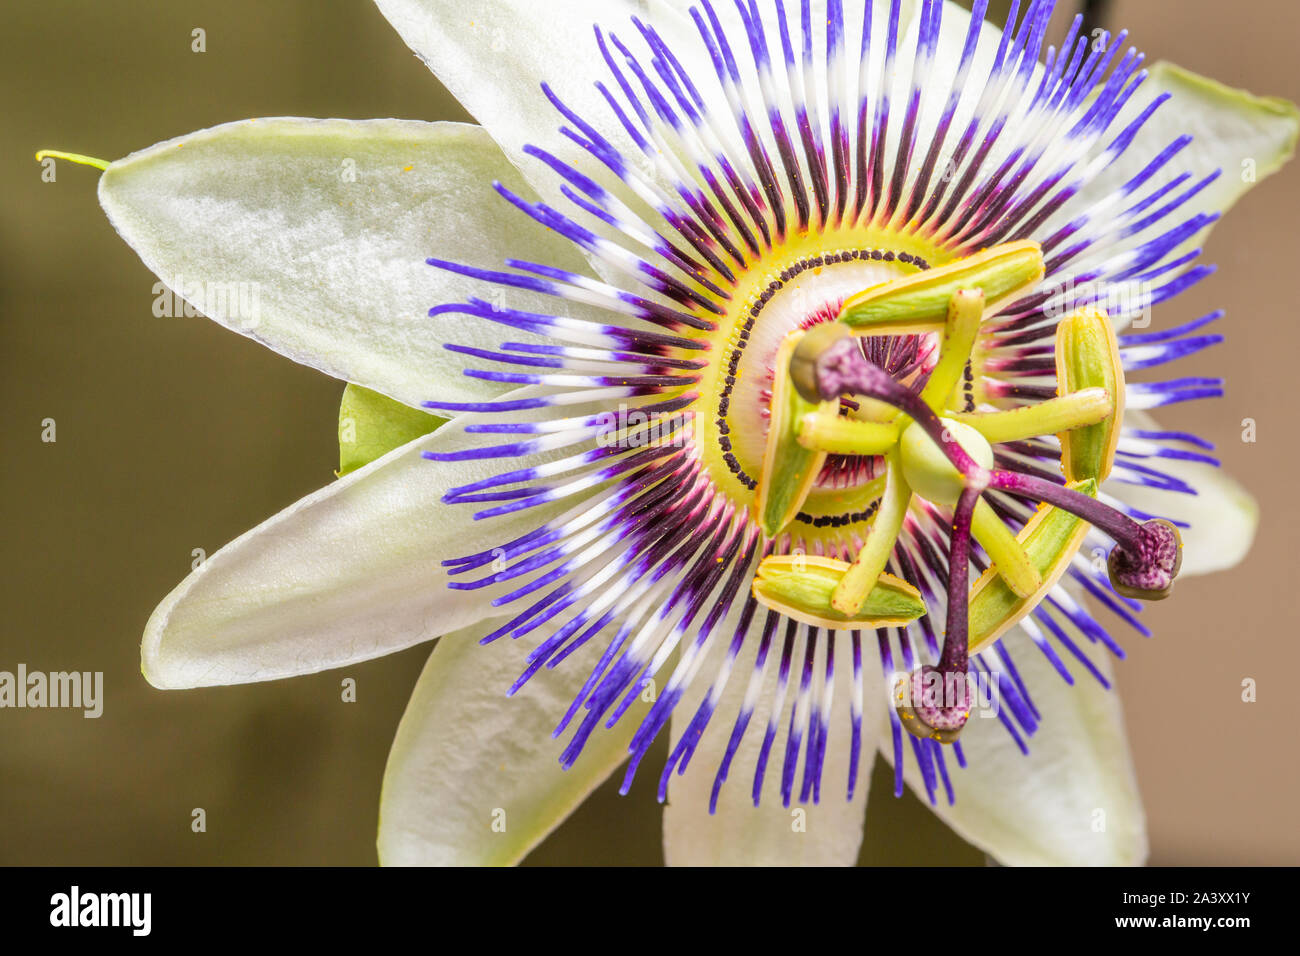 Blue Passion Flower or Common Passion Flower (Passiflora caerulea), native to Argentina and Brazil, on grey background Stock Photo